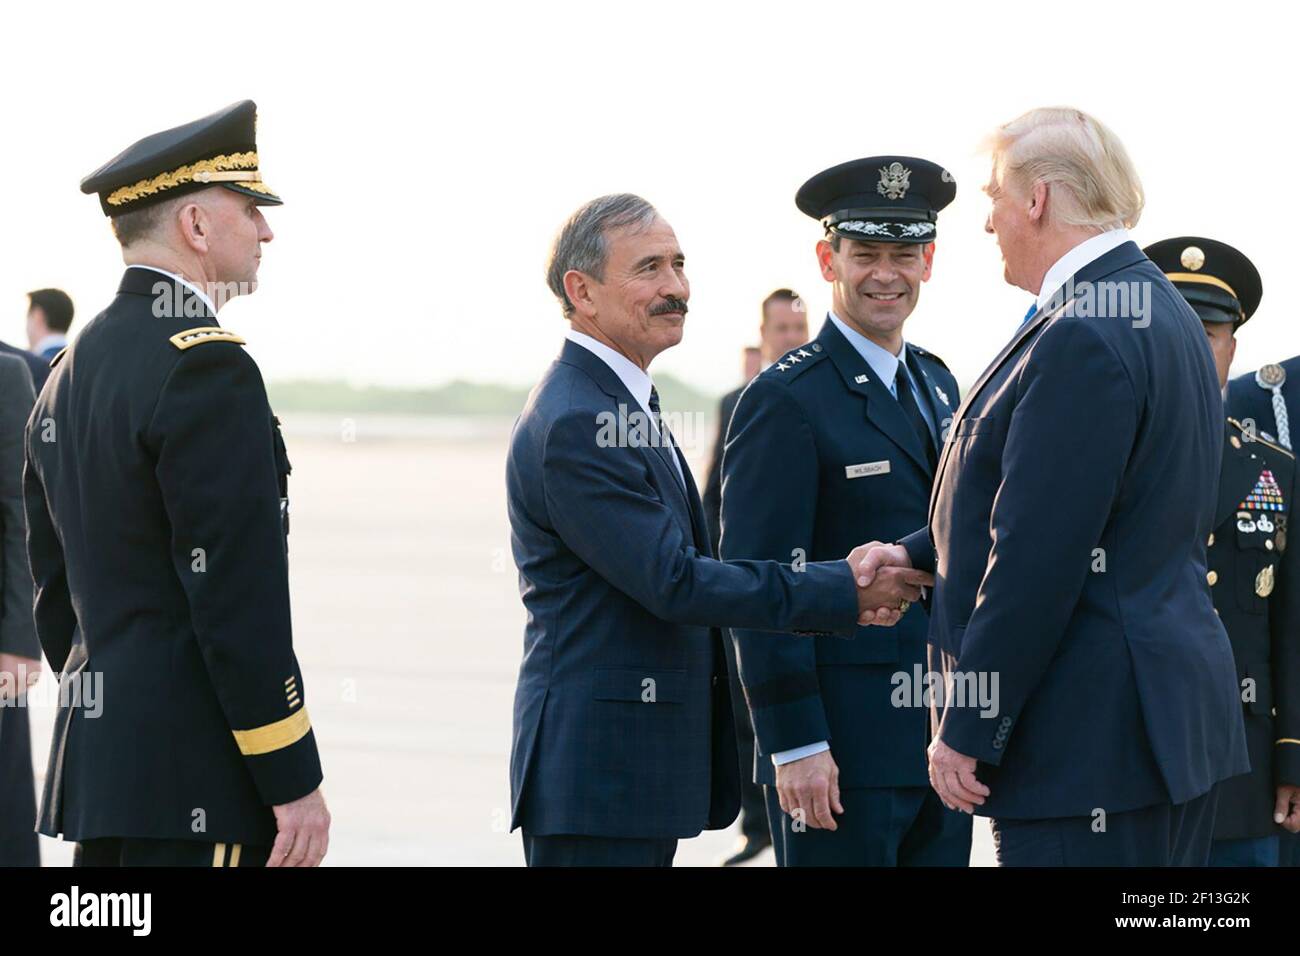 President Donald Trump shakes hands with U.S. Ambassador to the Republic of South Korea Harry B. Harris Jr. as he is welcomed upon arrival Saturday June 29 2019 to Osan Air Base in Seoul Republic of Korea. Stock Photo